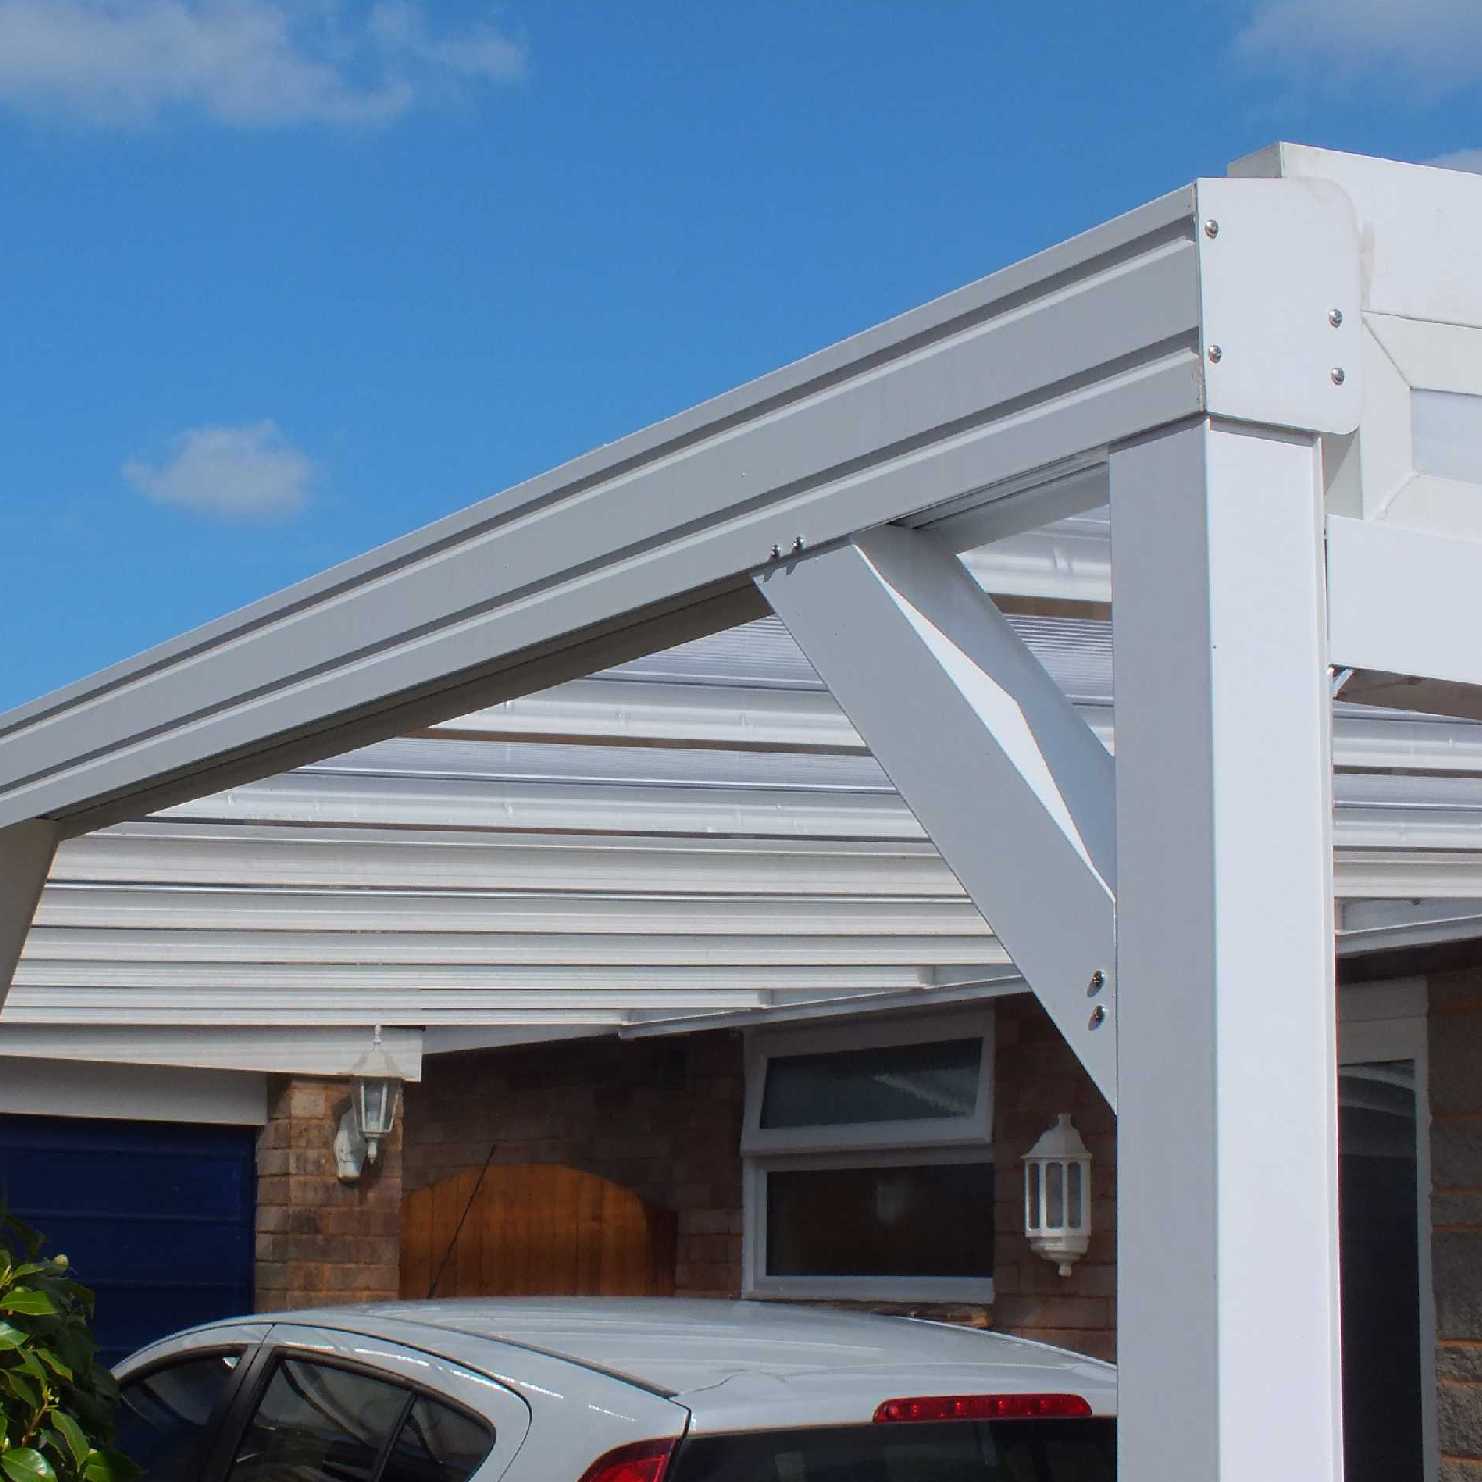 Buy Omega Smart Lean-To Canopy, White with 16mm Polycarbonate Glazing - 8.4m (W) x 3.0m (P), (4) Supporting Posts online today